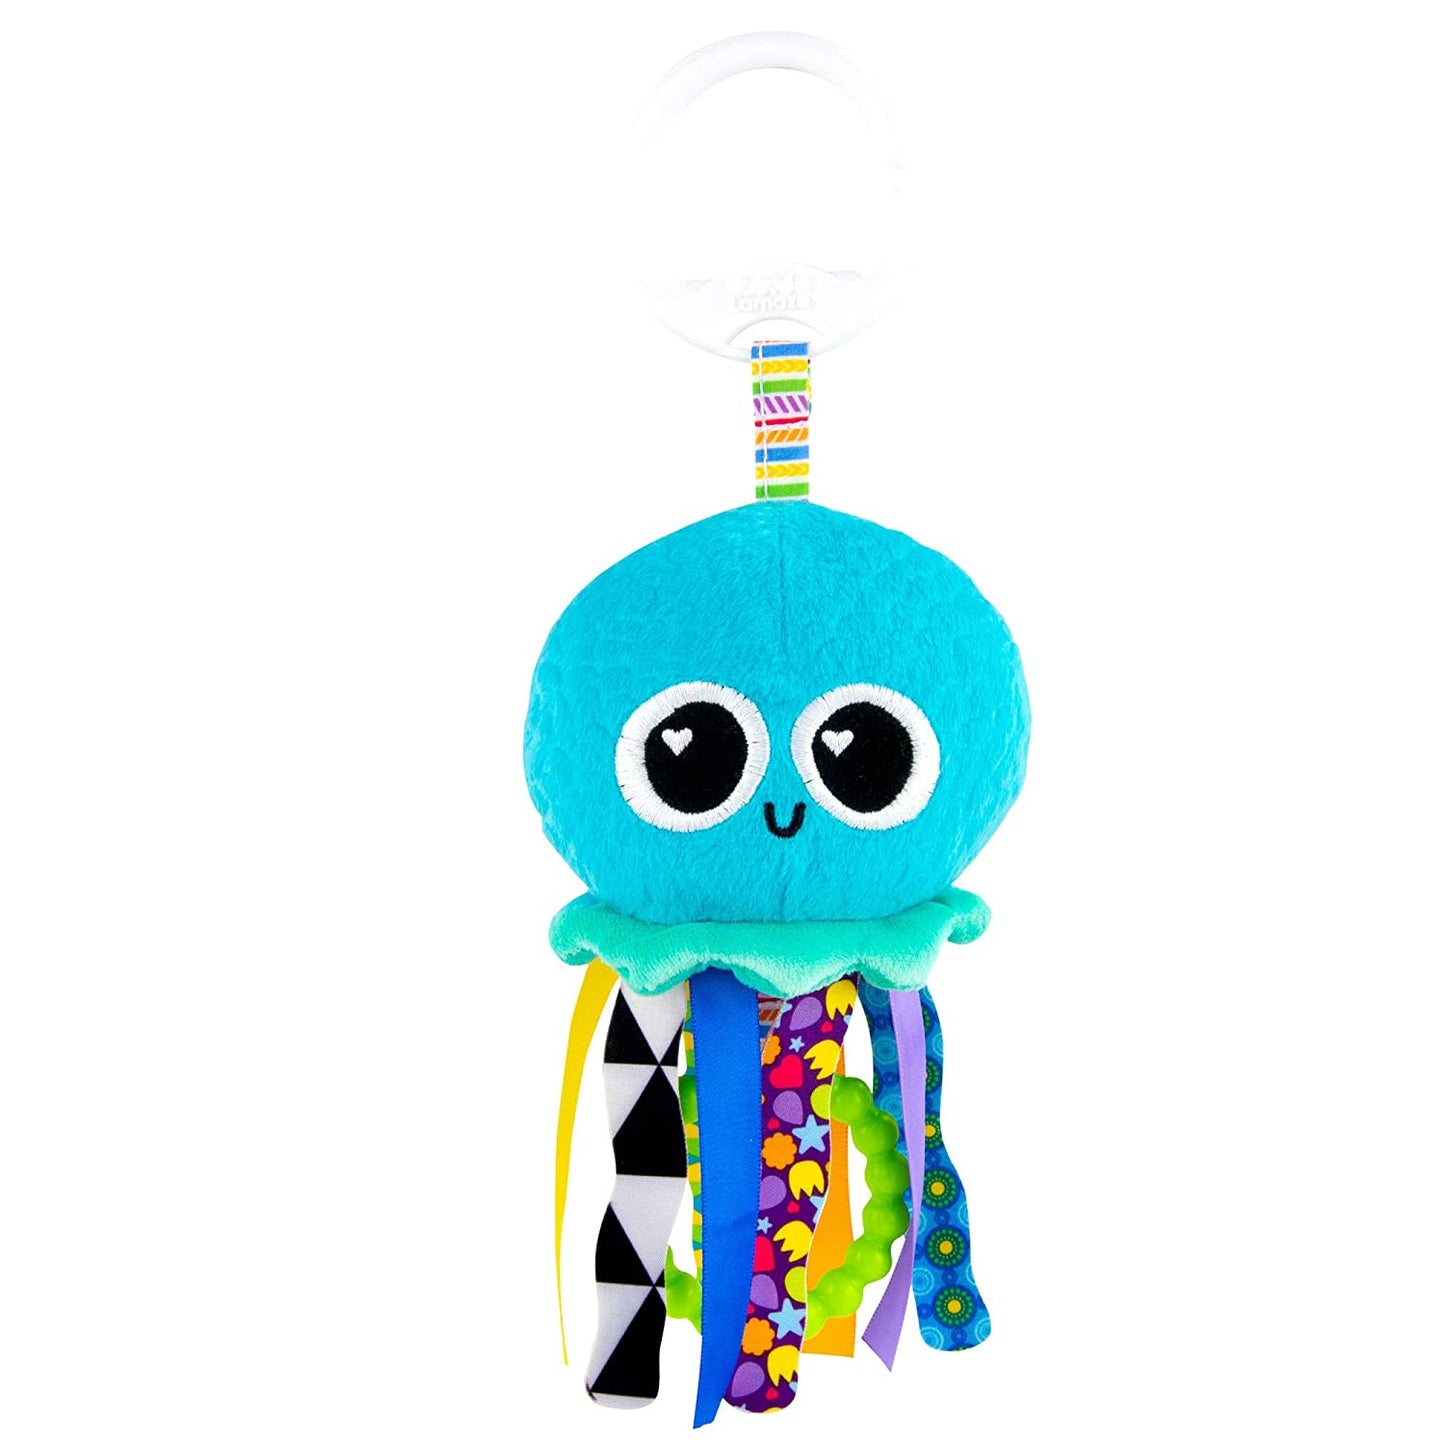 Sprinkles the Jelly Fish